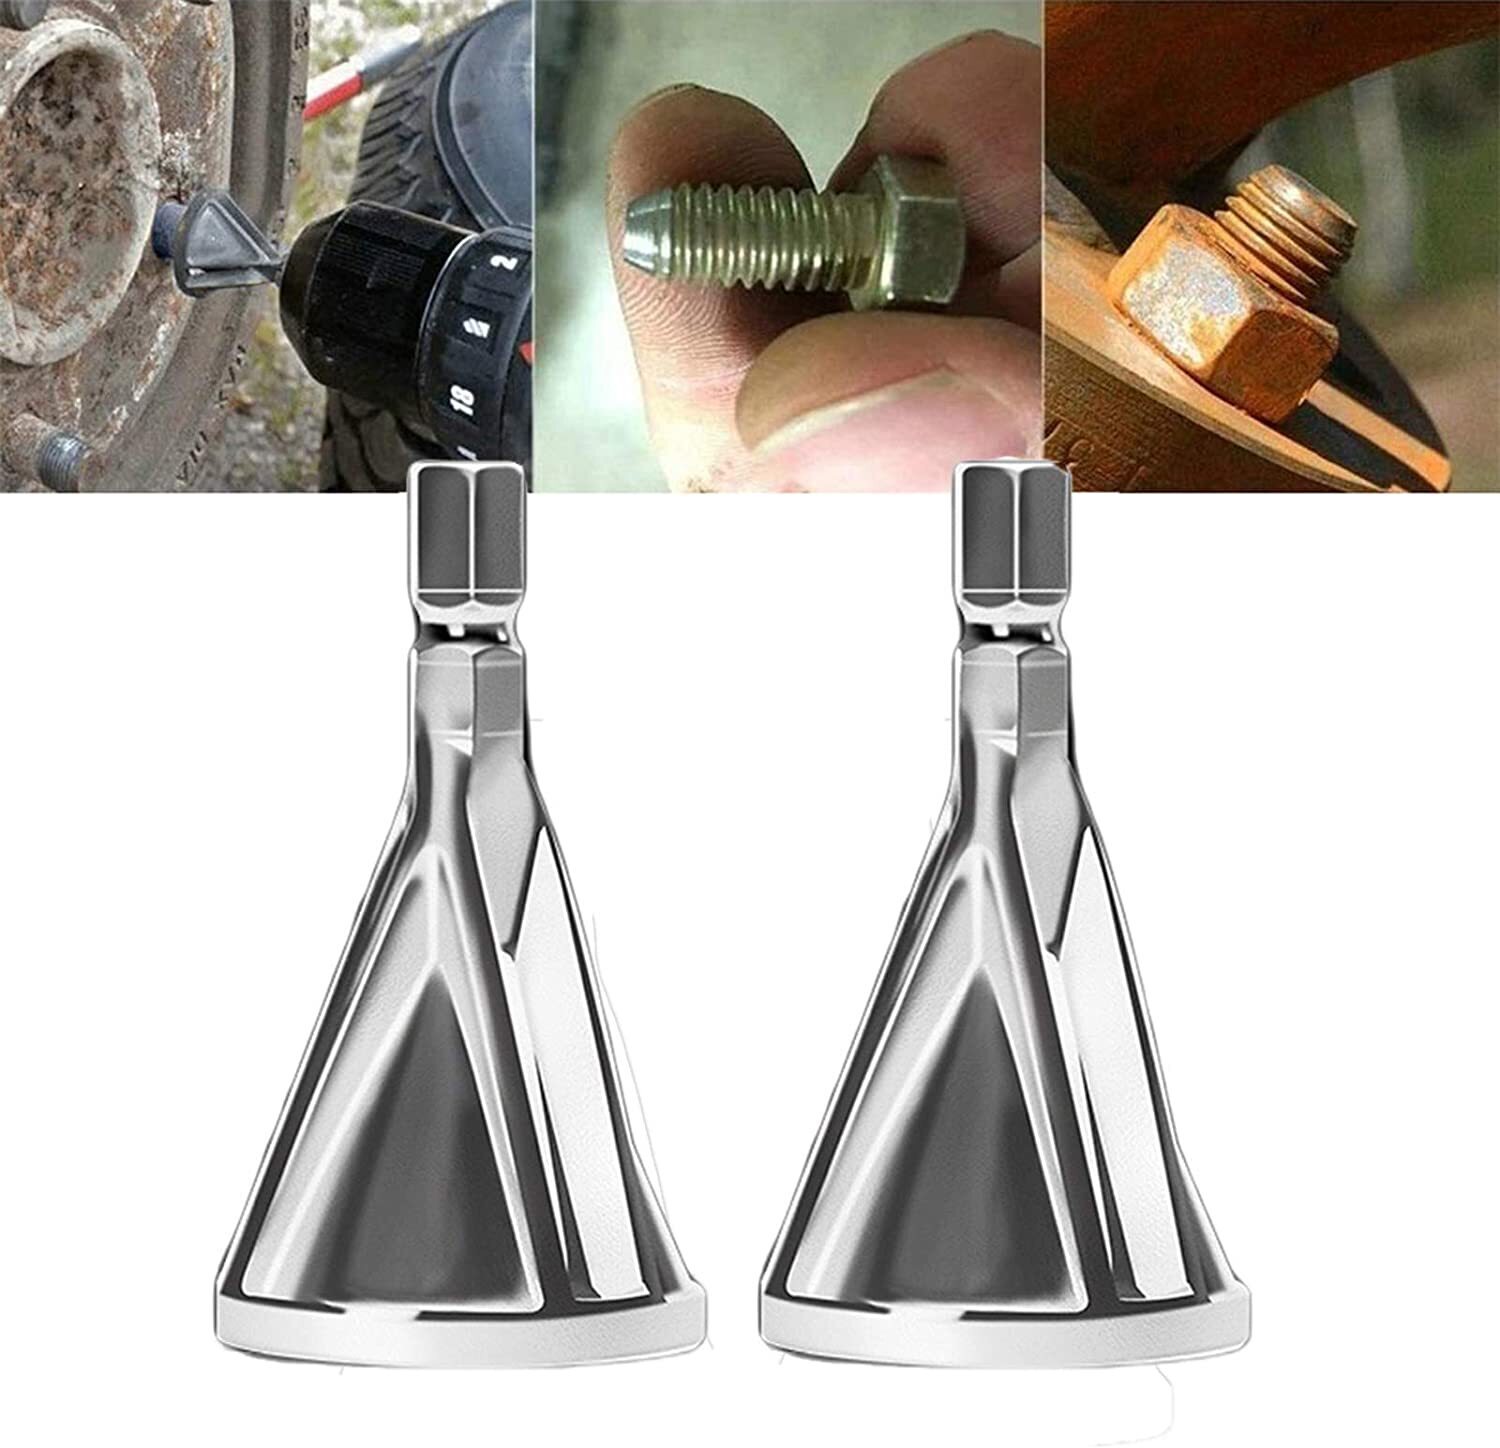 Stainless steel Remove Burr Tools